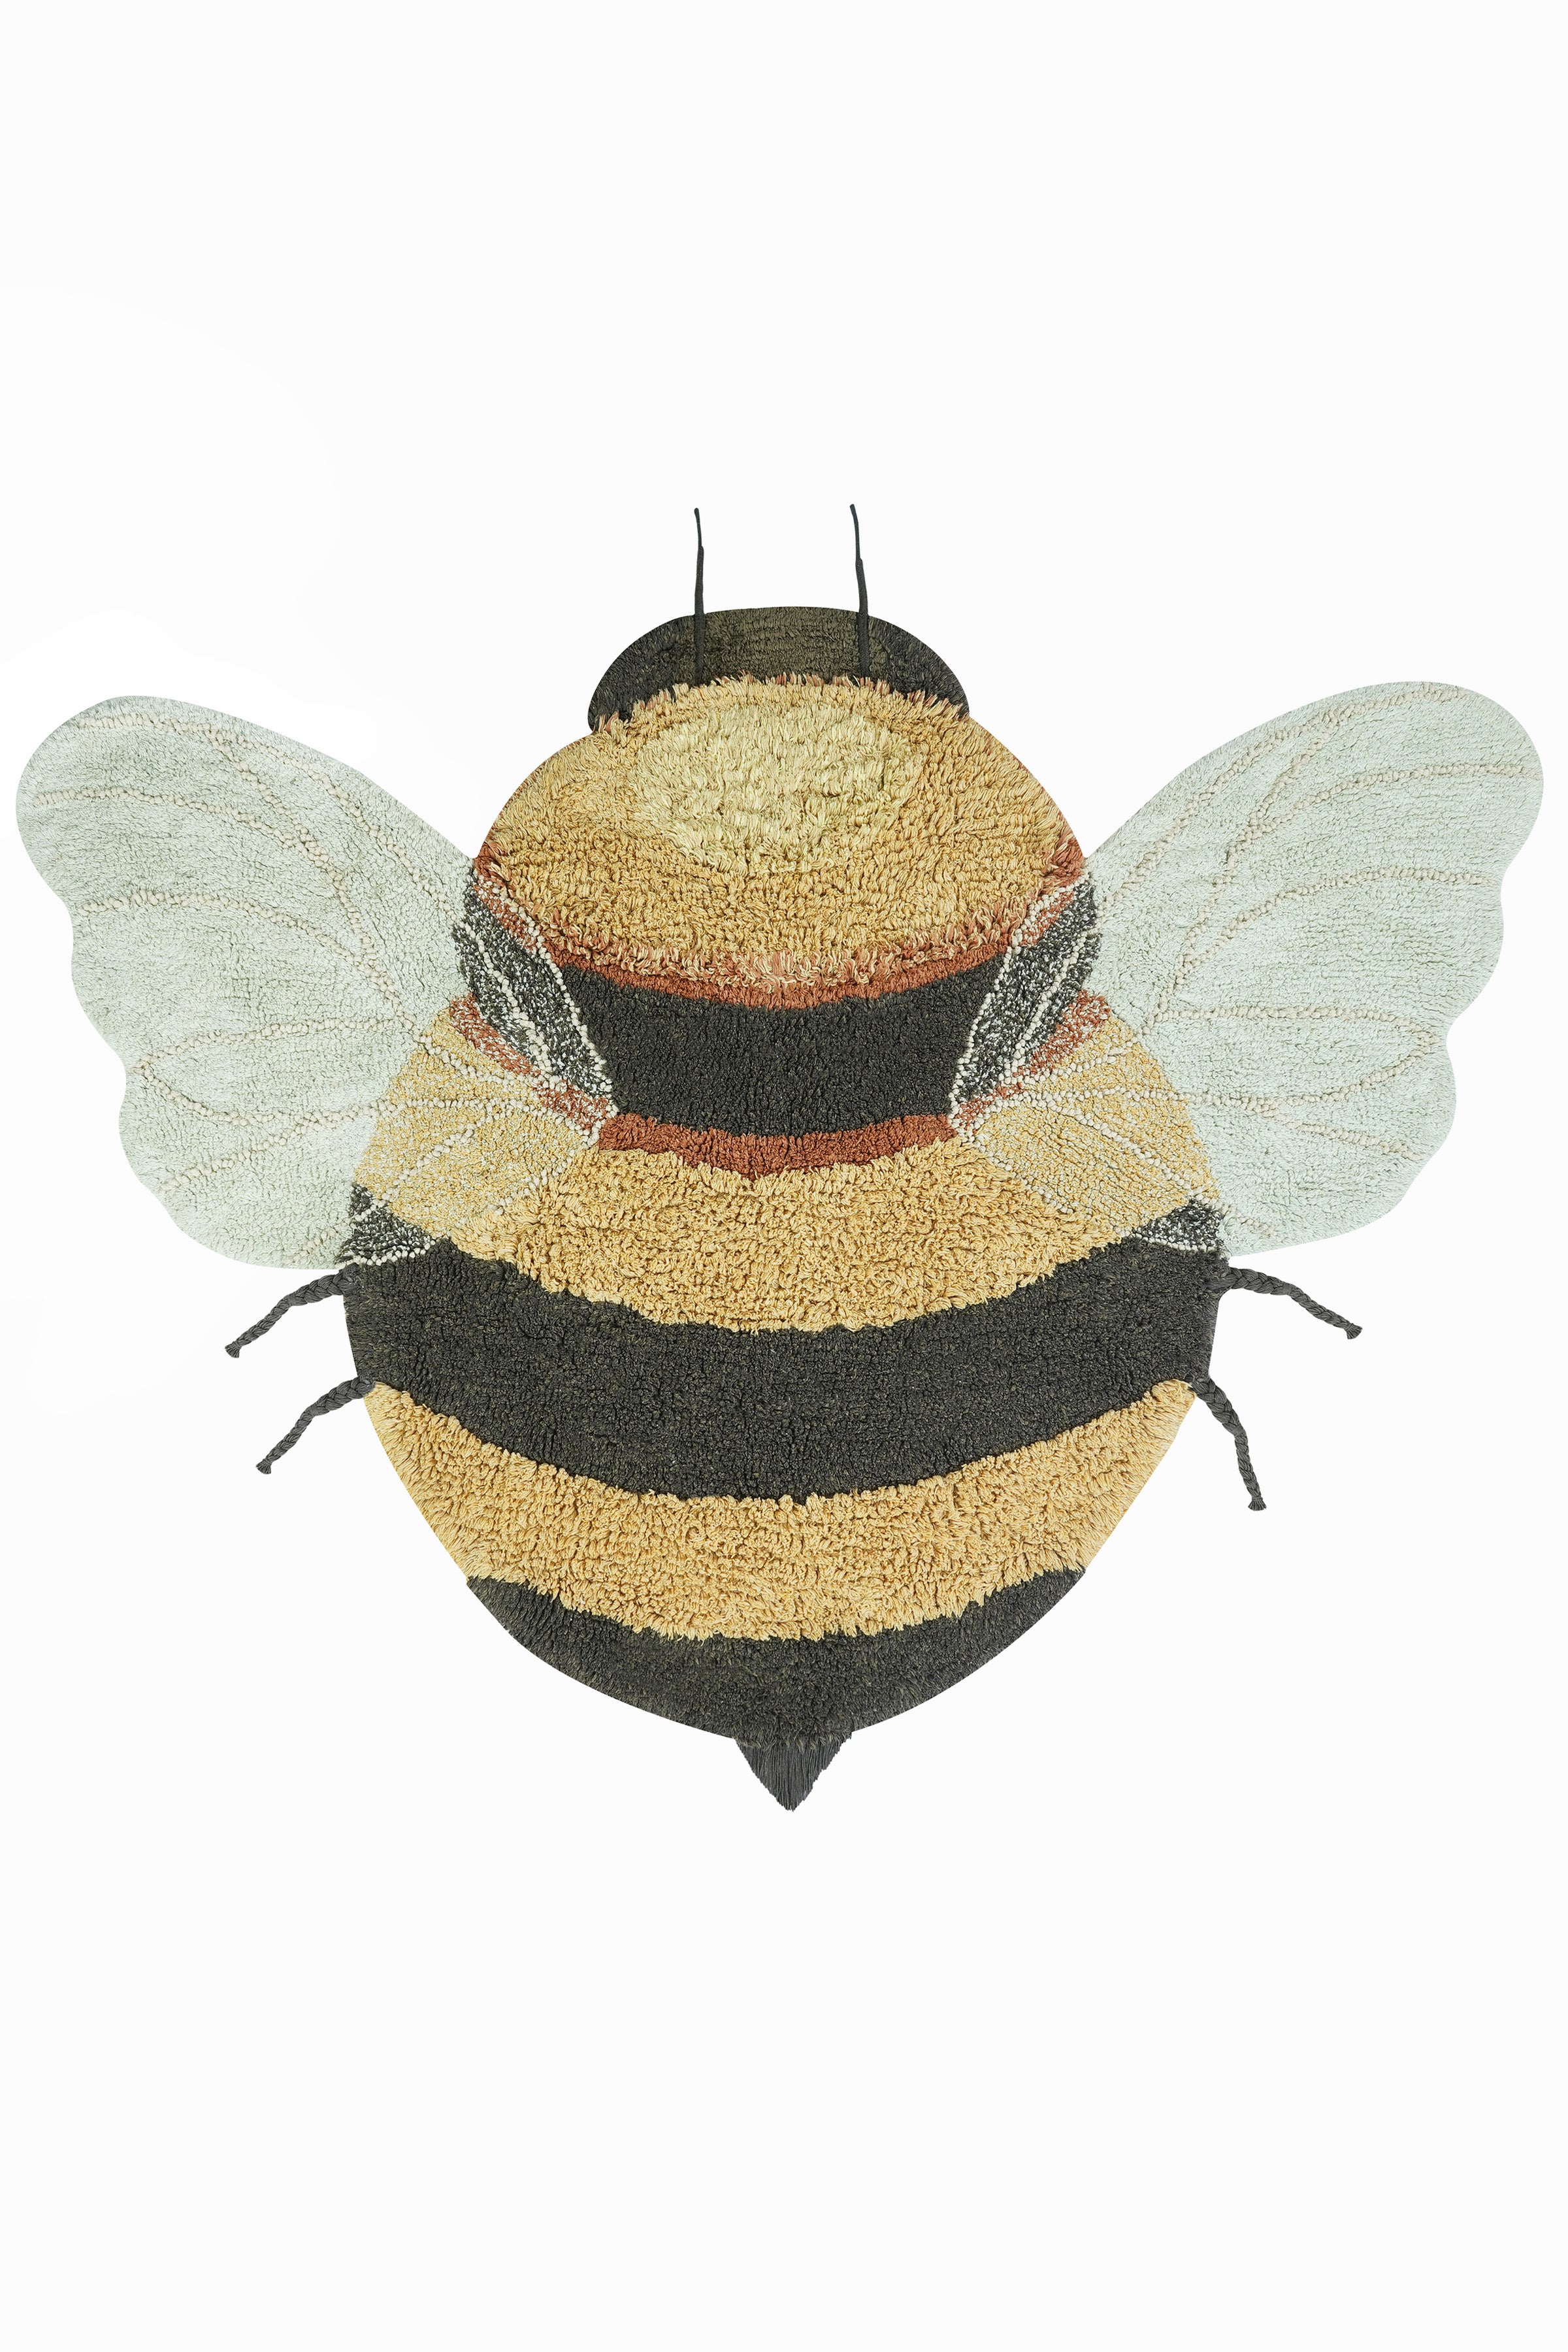 Bee-shaped rug with shades of gold, orange, brown, cream, and beige